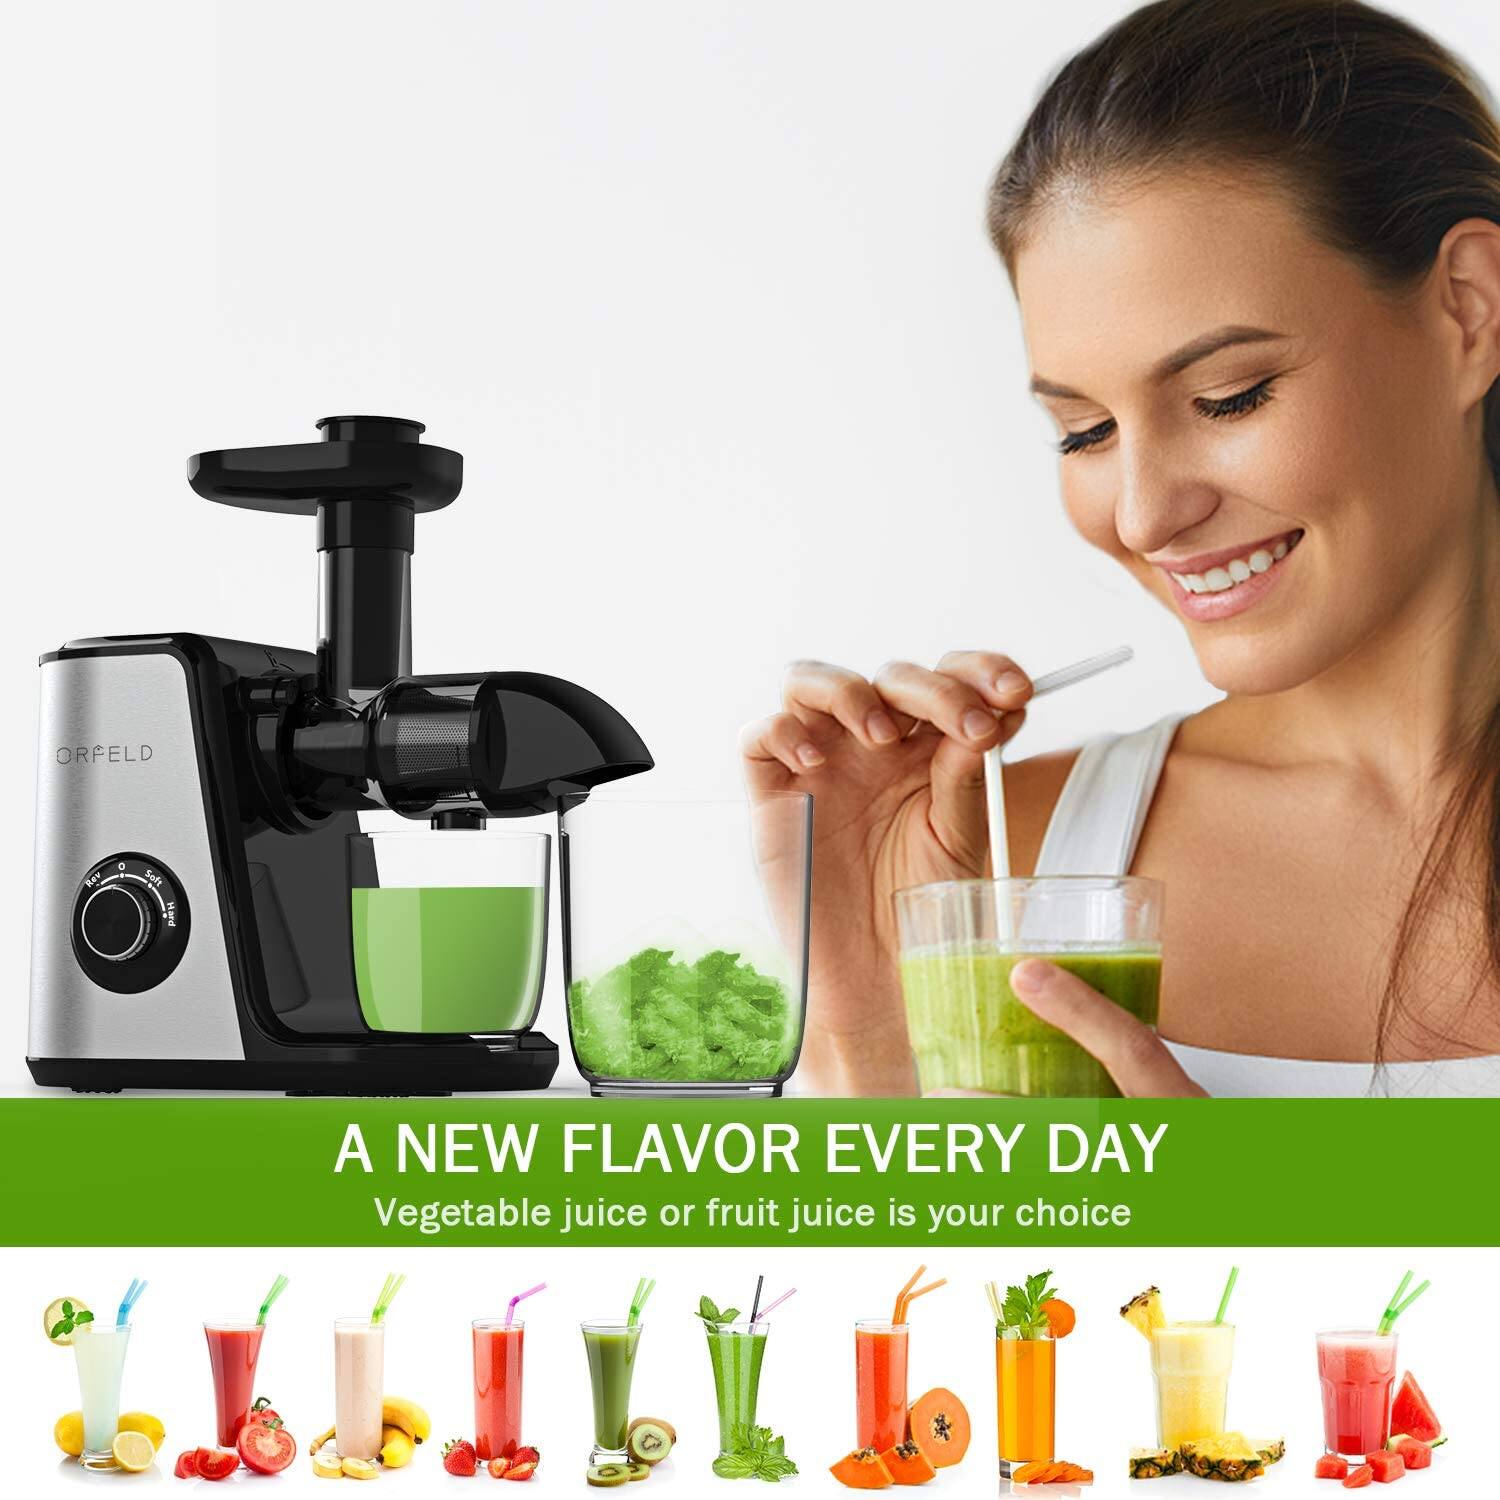 ORFELD Juicer Machines, Slow Masticating Juicer Extractor $64.49 + FS with PRIME